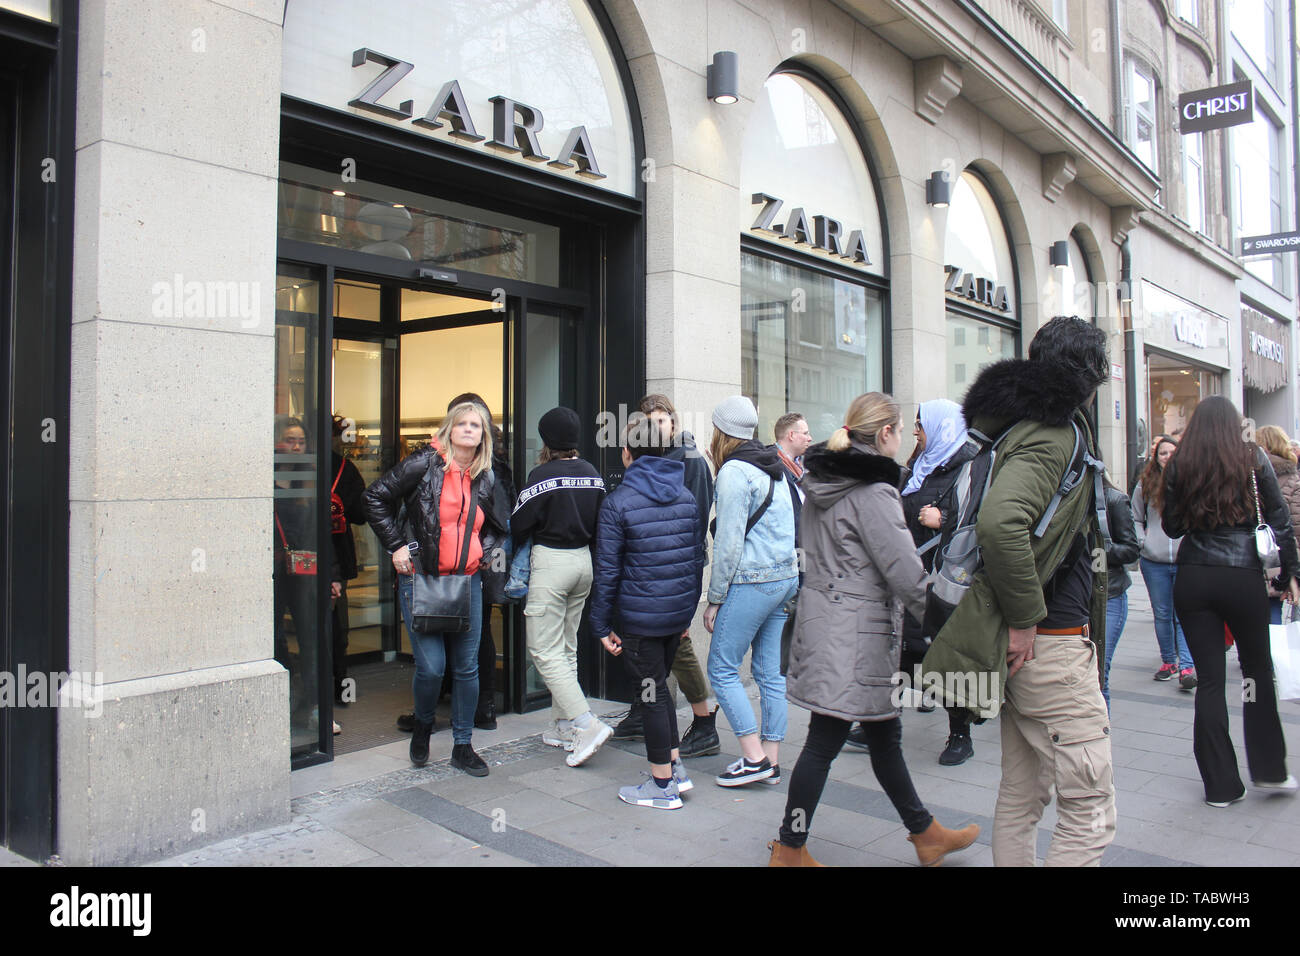 Shopping scene - mixed people, consumers, entering and passing by at Zara store in Munich shopping zone. Stock Photo